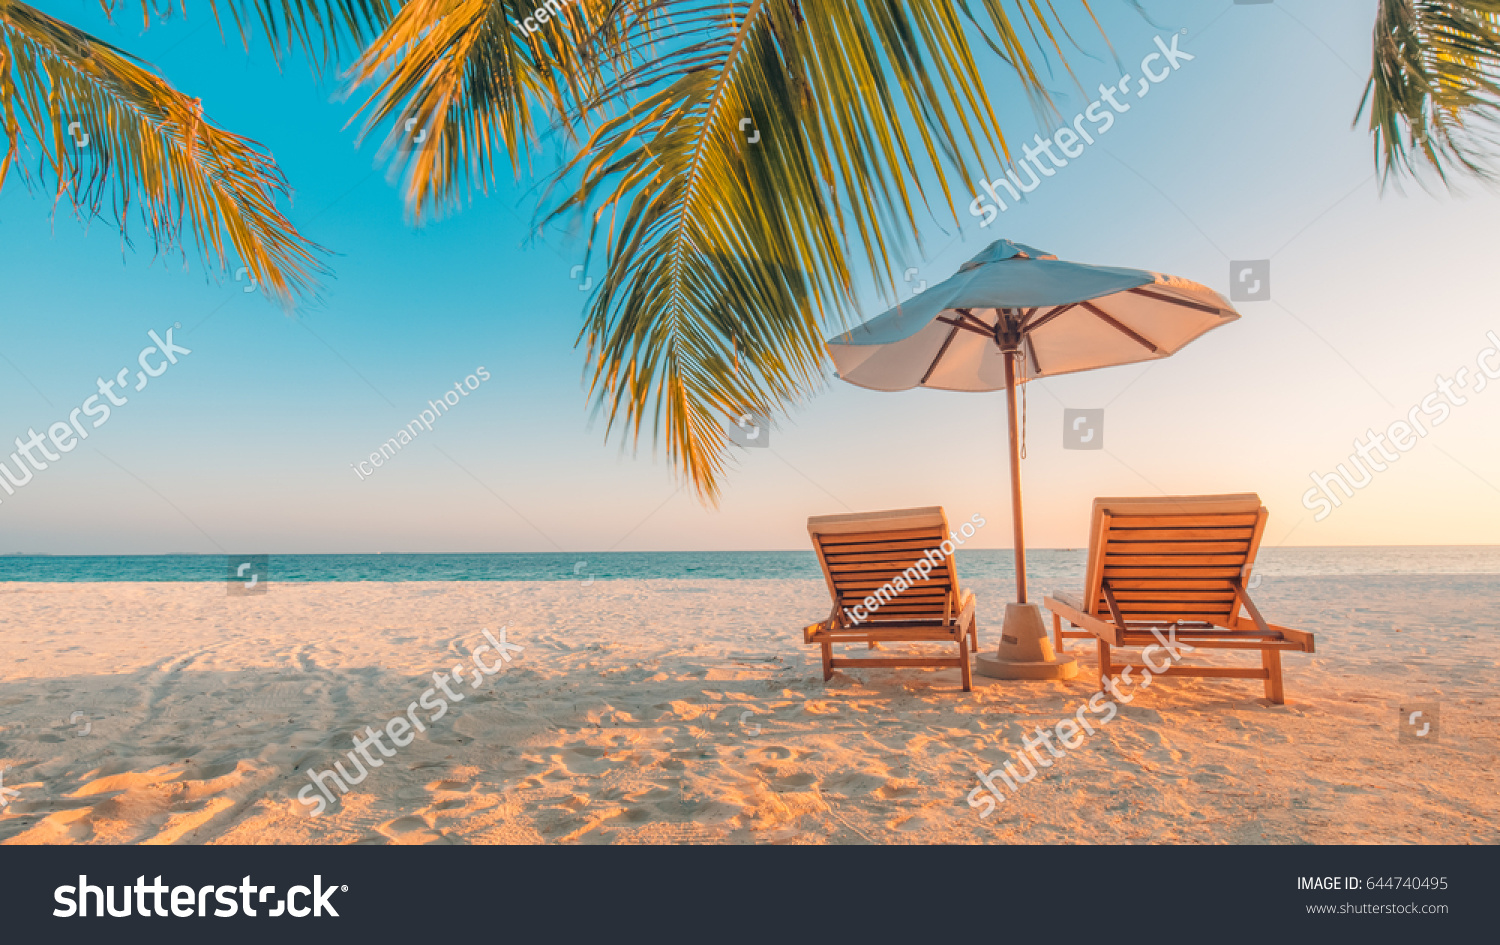 Tranquil beach scene. Exotic tropical beach landscape for background or wallpaper. Design of summer vacation holiday concept. #644740495